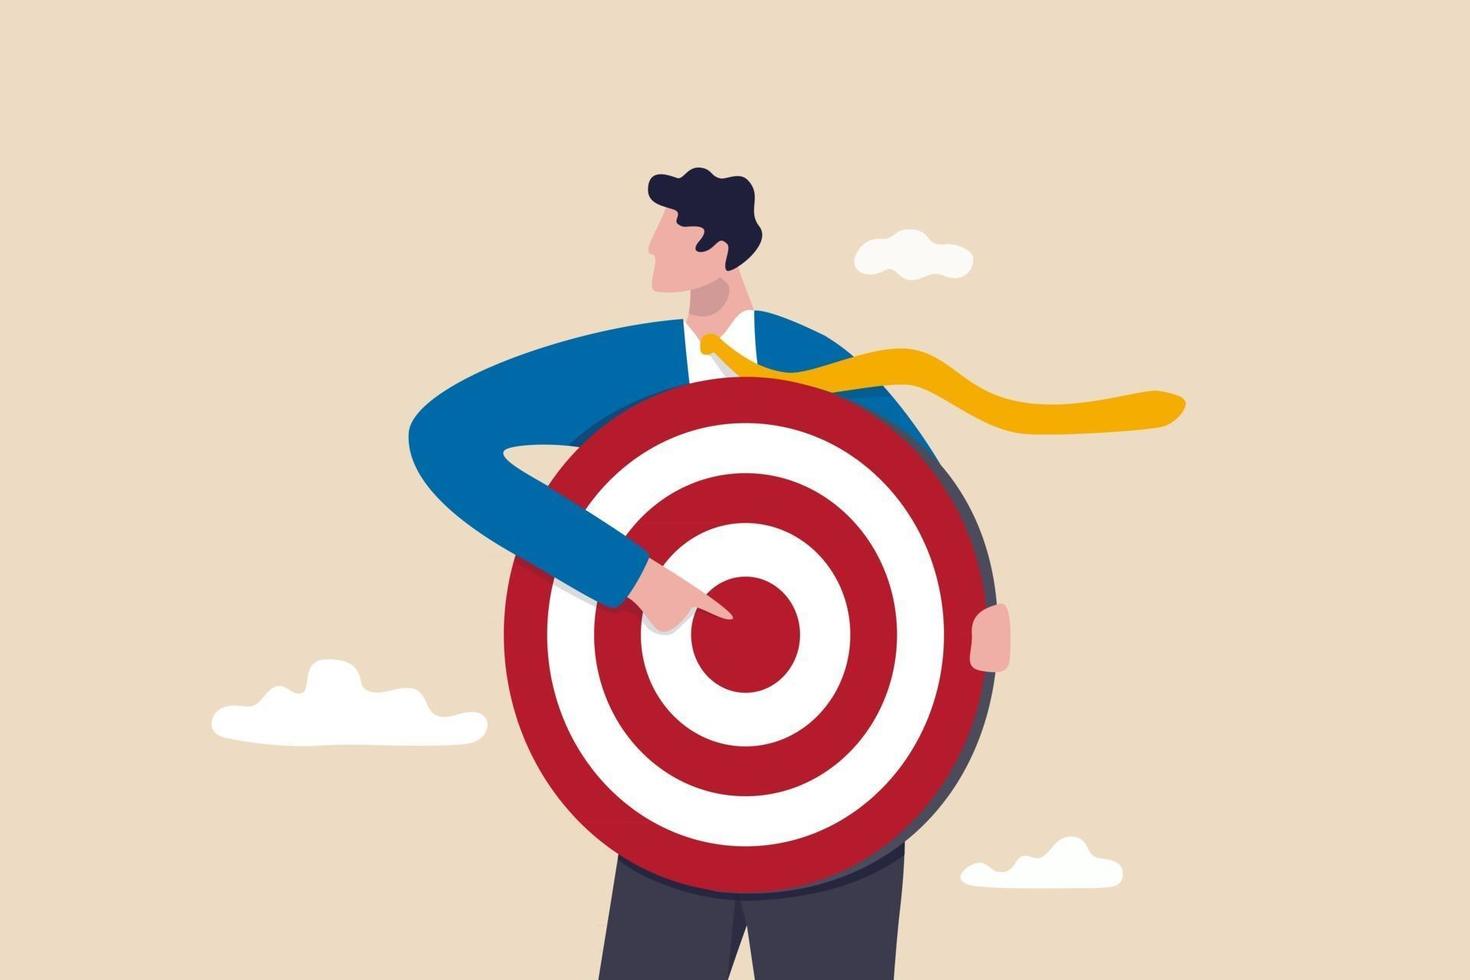 Focus on business target, setting goal for motivation, target audience for advertising or purpose for career development concept, businessman holding archer target or dashboard pointing at bullseye. vector